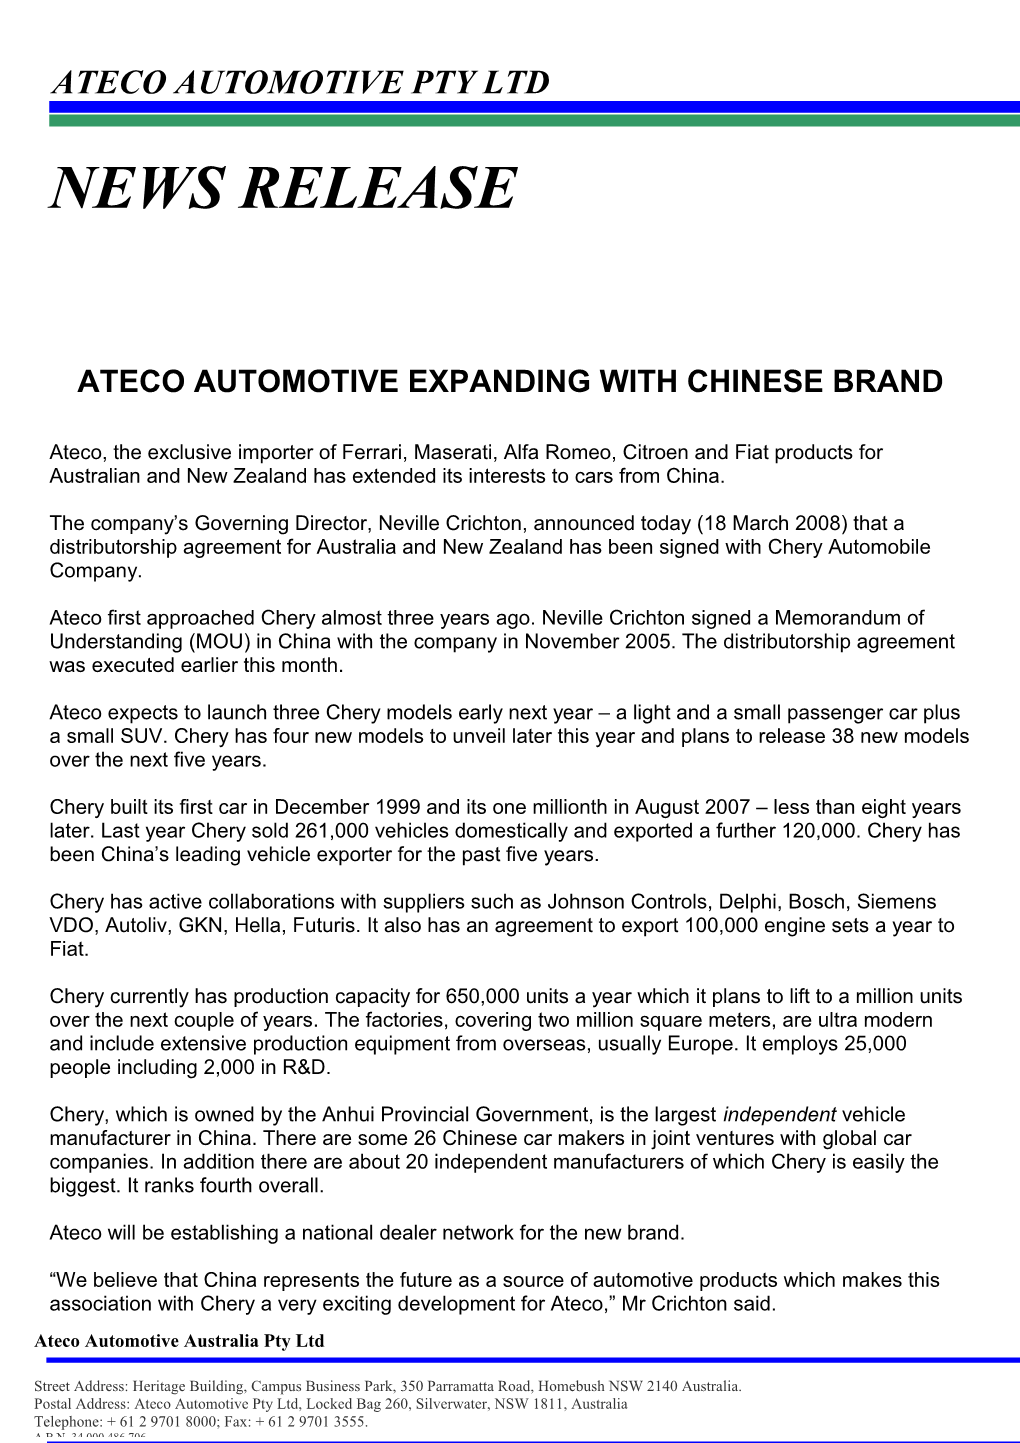 Ateco Automotive Expanding with Chinese Brand